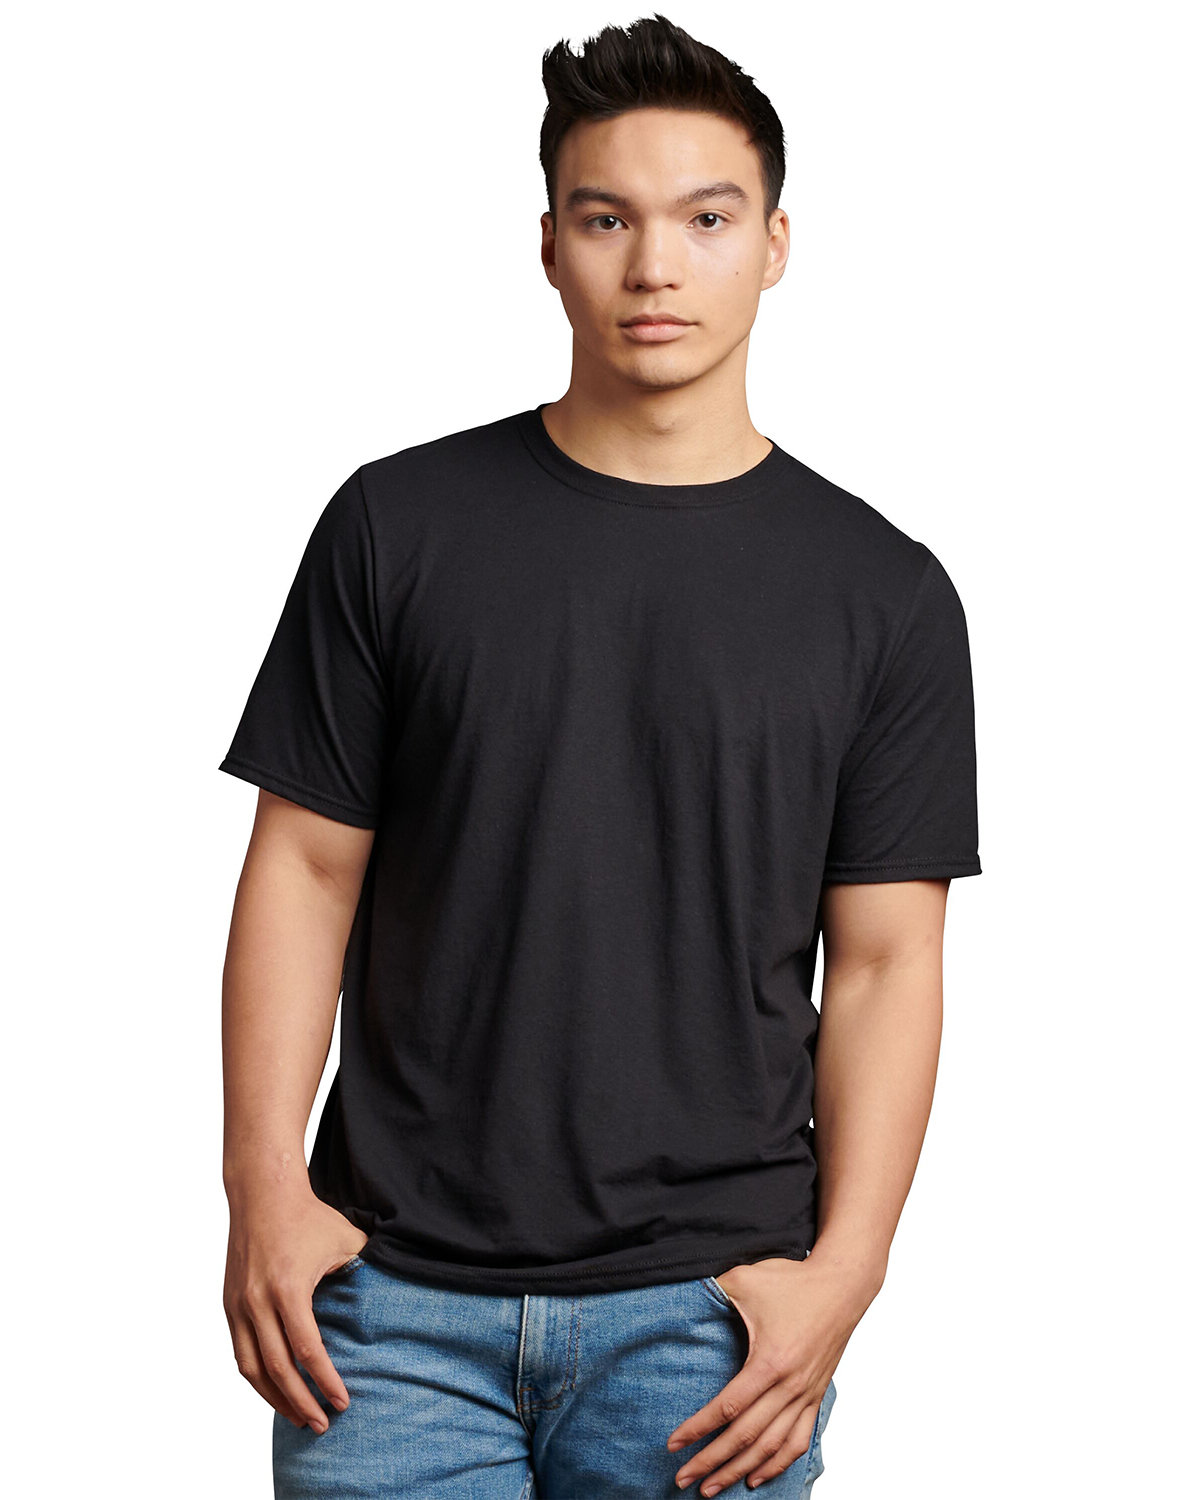 Russell Athletic Unisex Essential Performance T-Shirt BLACK 